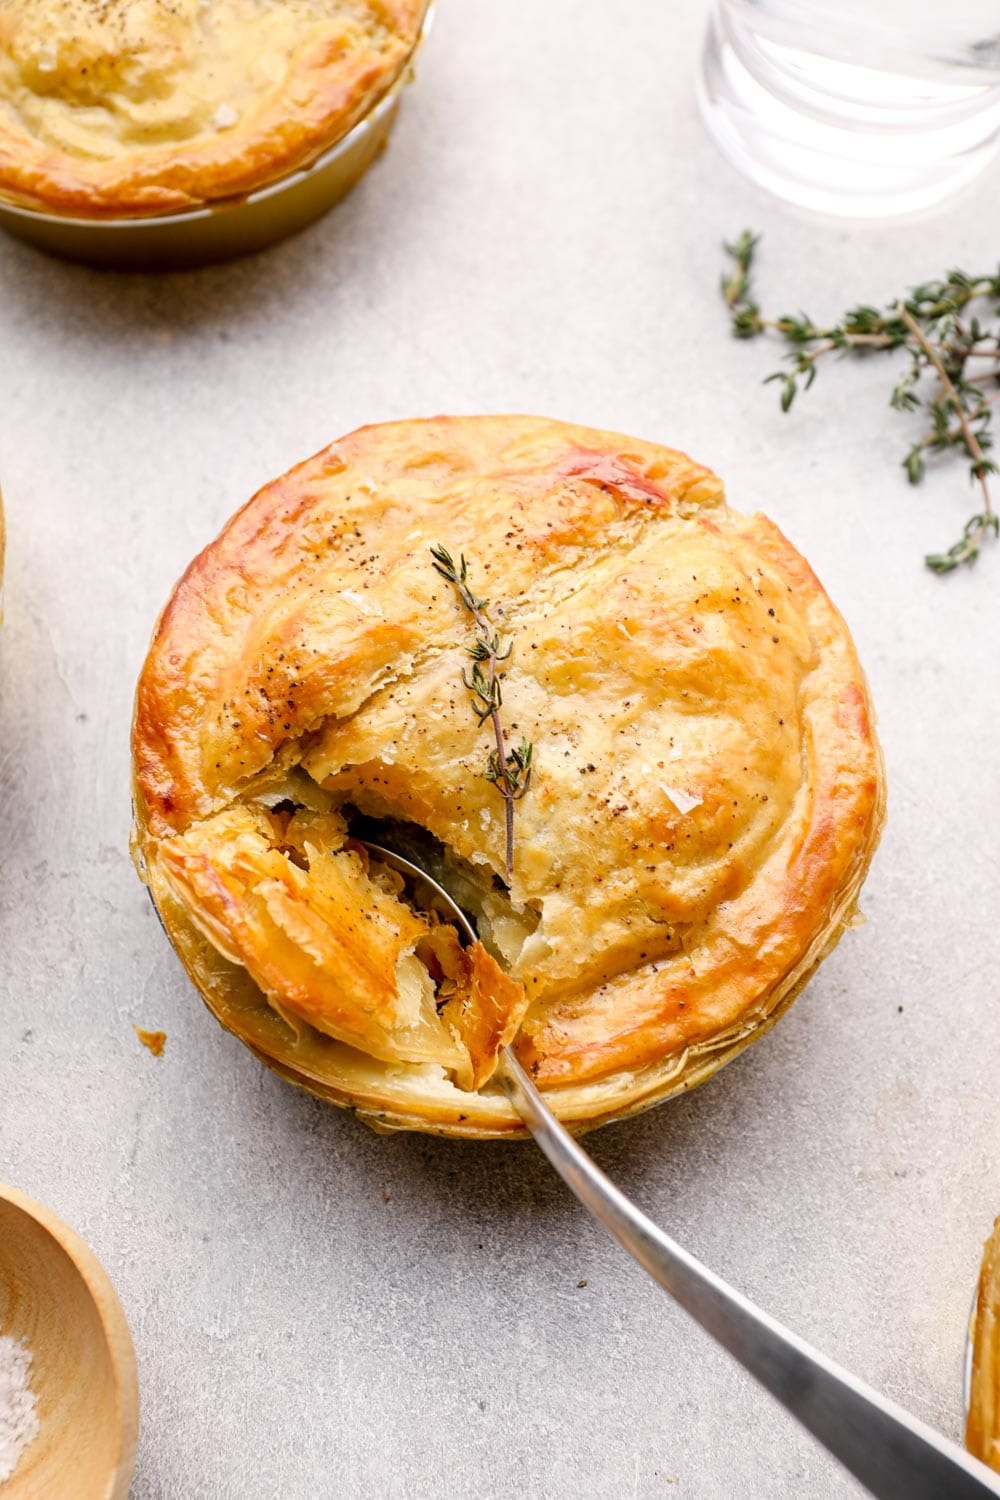 A savory pie topped with flavorful herbs and spices.